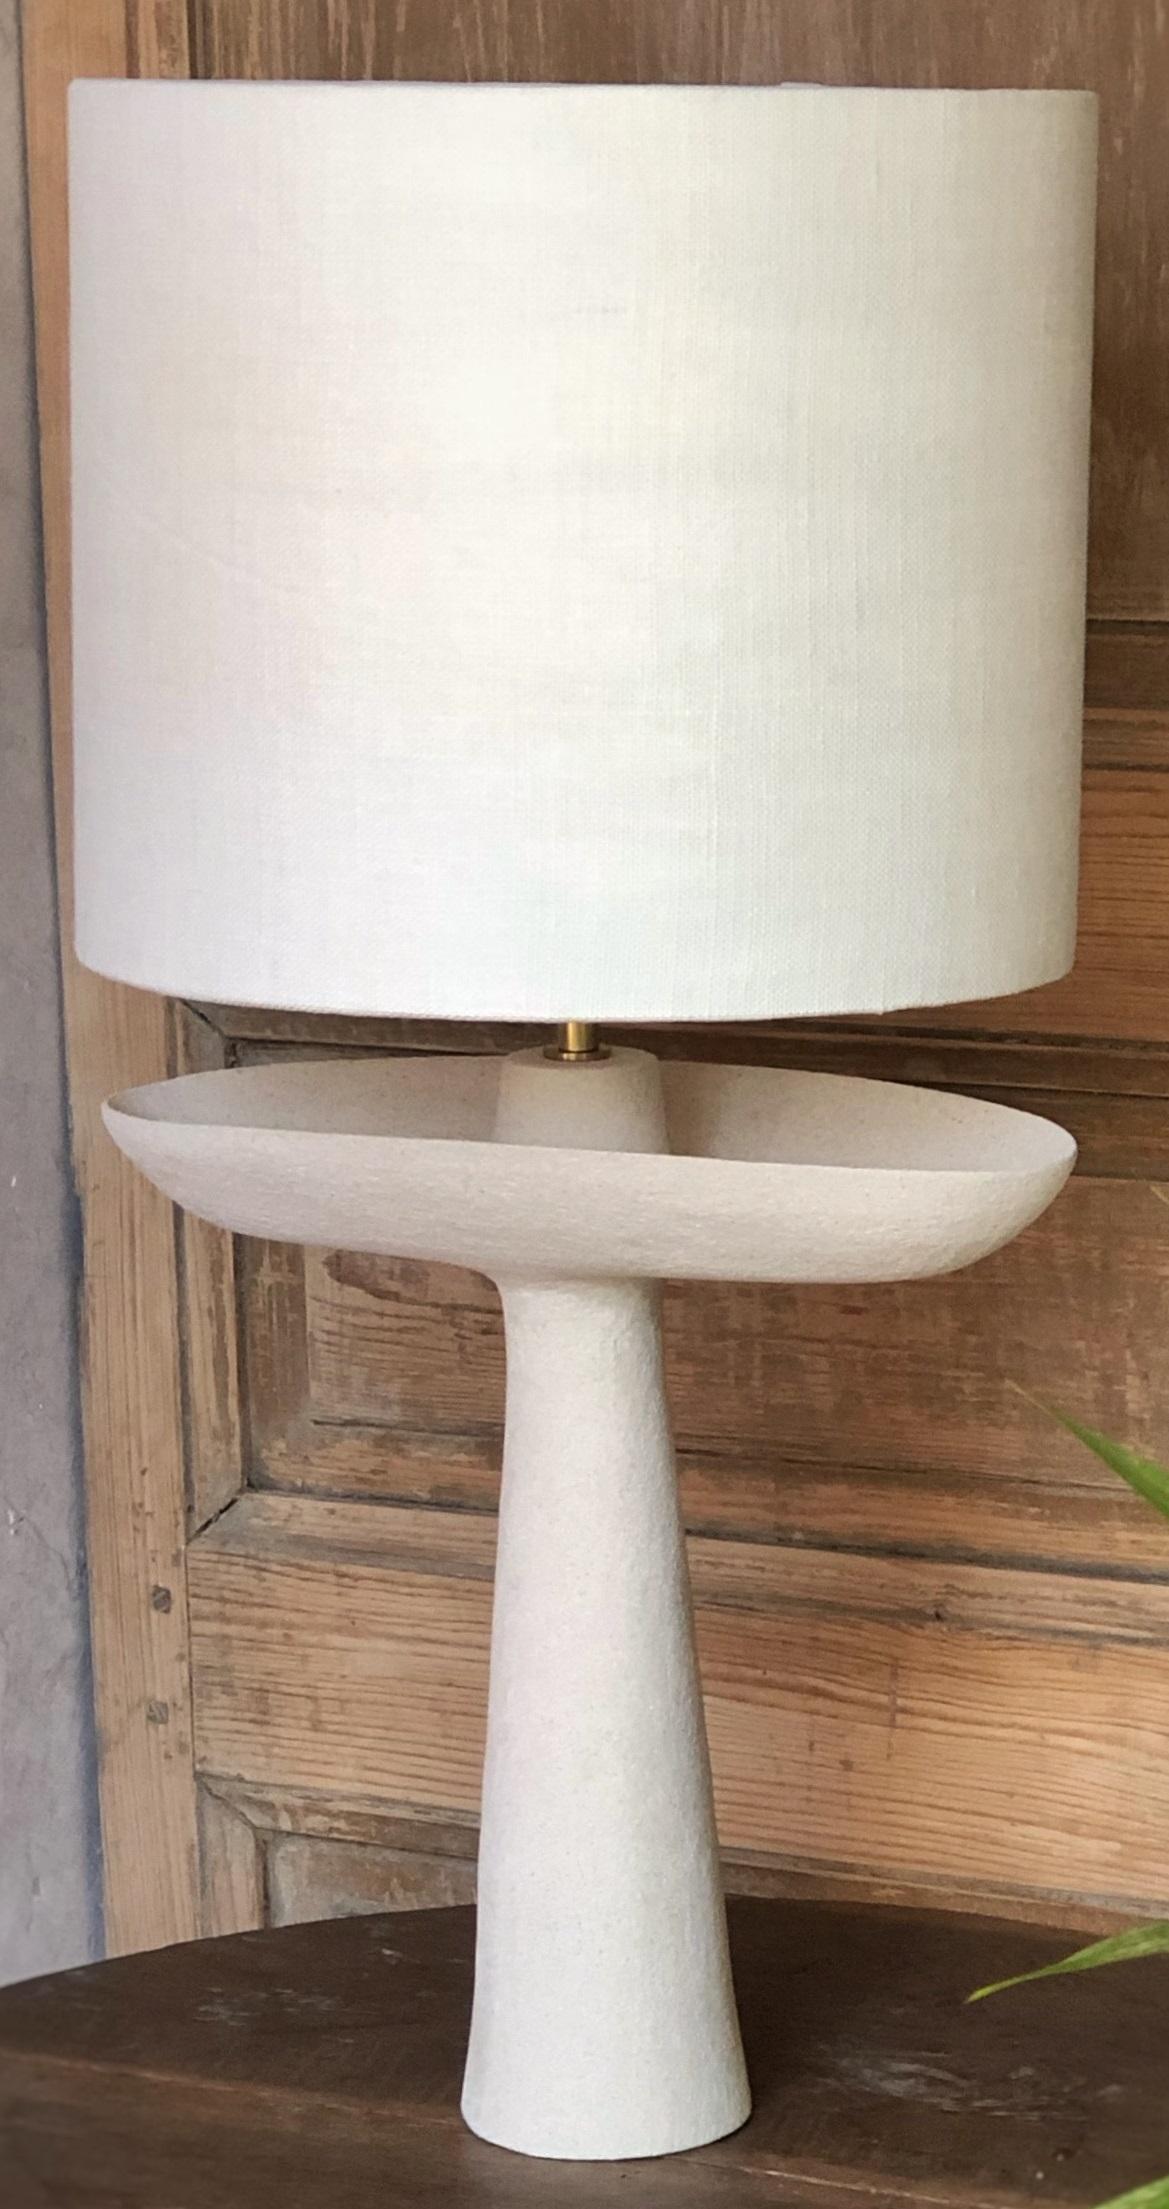 L05 Brutal Lamp by Sophie Vaidie
One Of A Kind.
Dimensions: D 28 x W 30 x H 60 cm. 
Materials: Beige brutal stoneware and white linen fabric.

All our lamps can be wired according to each country. If sold to the USA it will be wired for the USA for